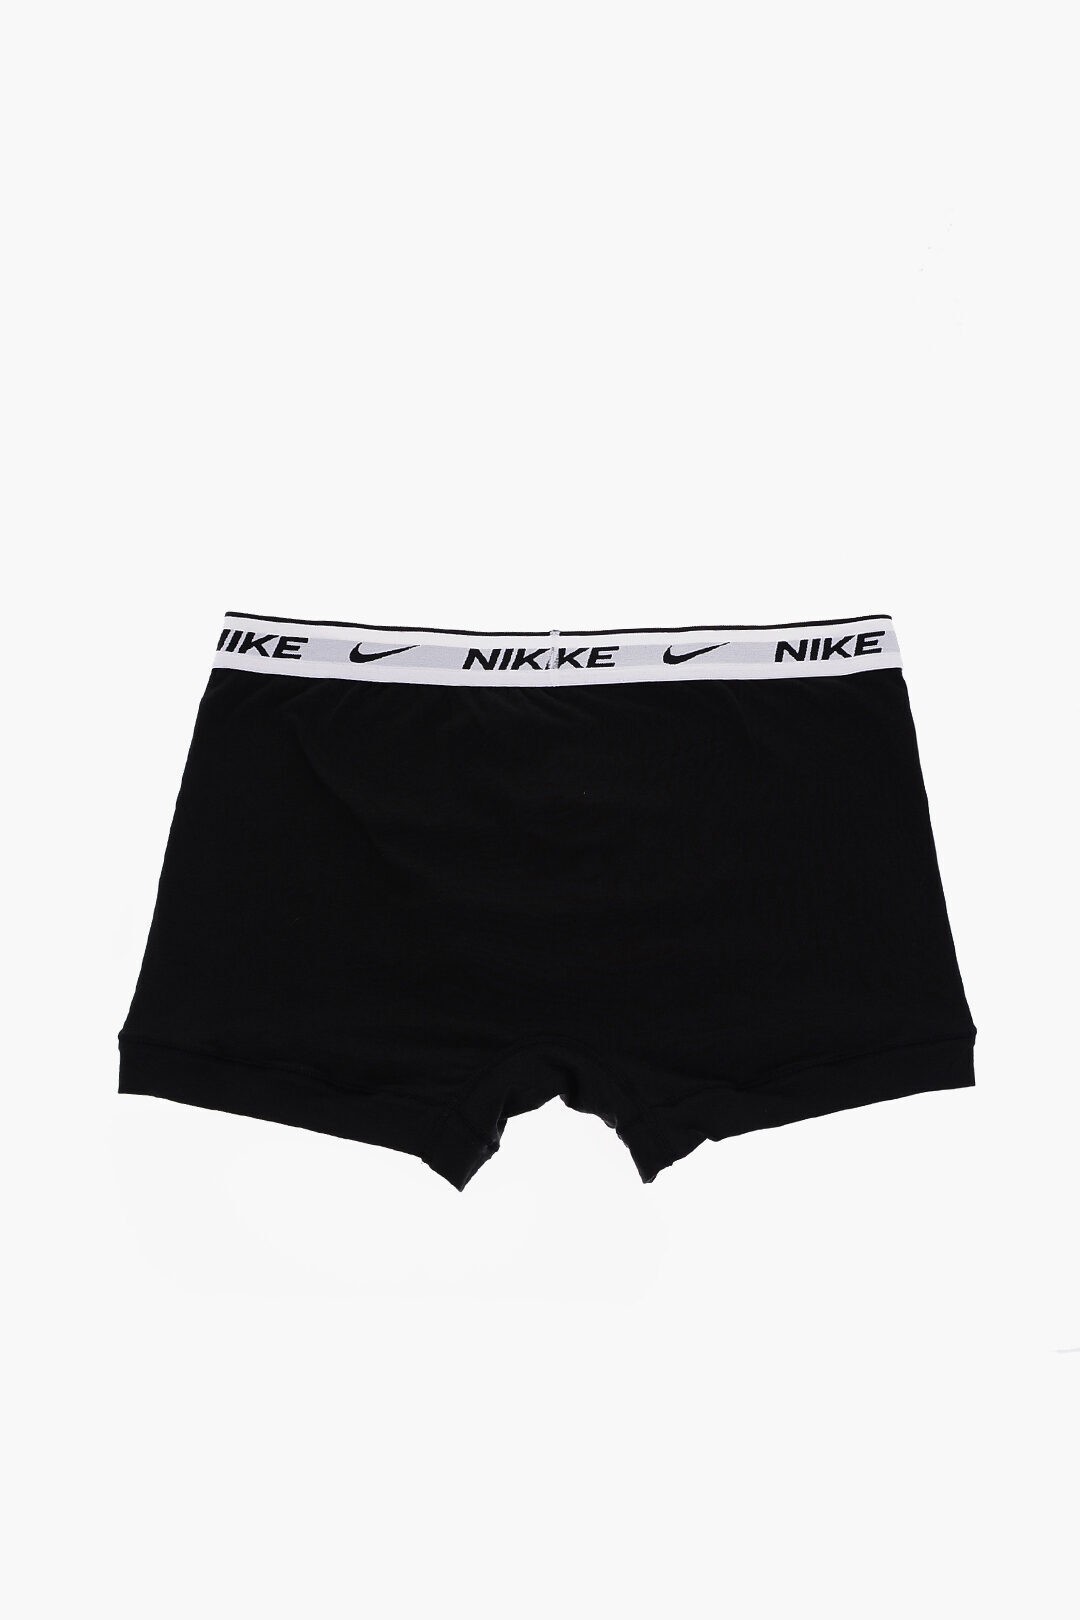 Boxer shorts Nike Dri-FIT Everyday Cotton Stretch Trunk 3-Pack Multicolor